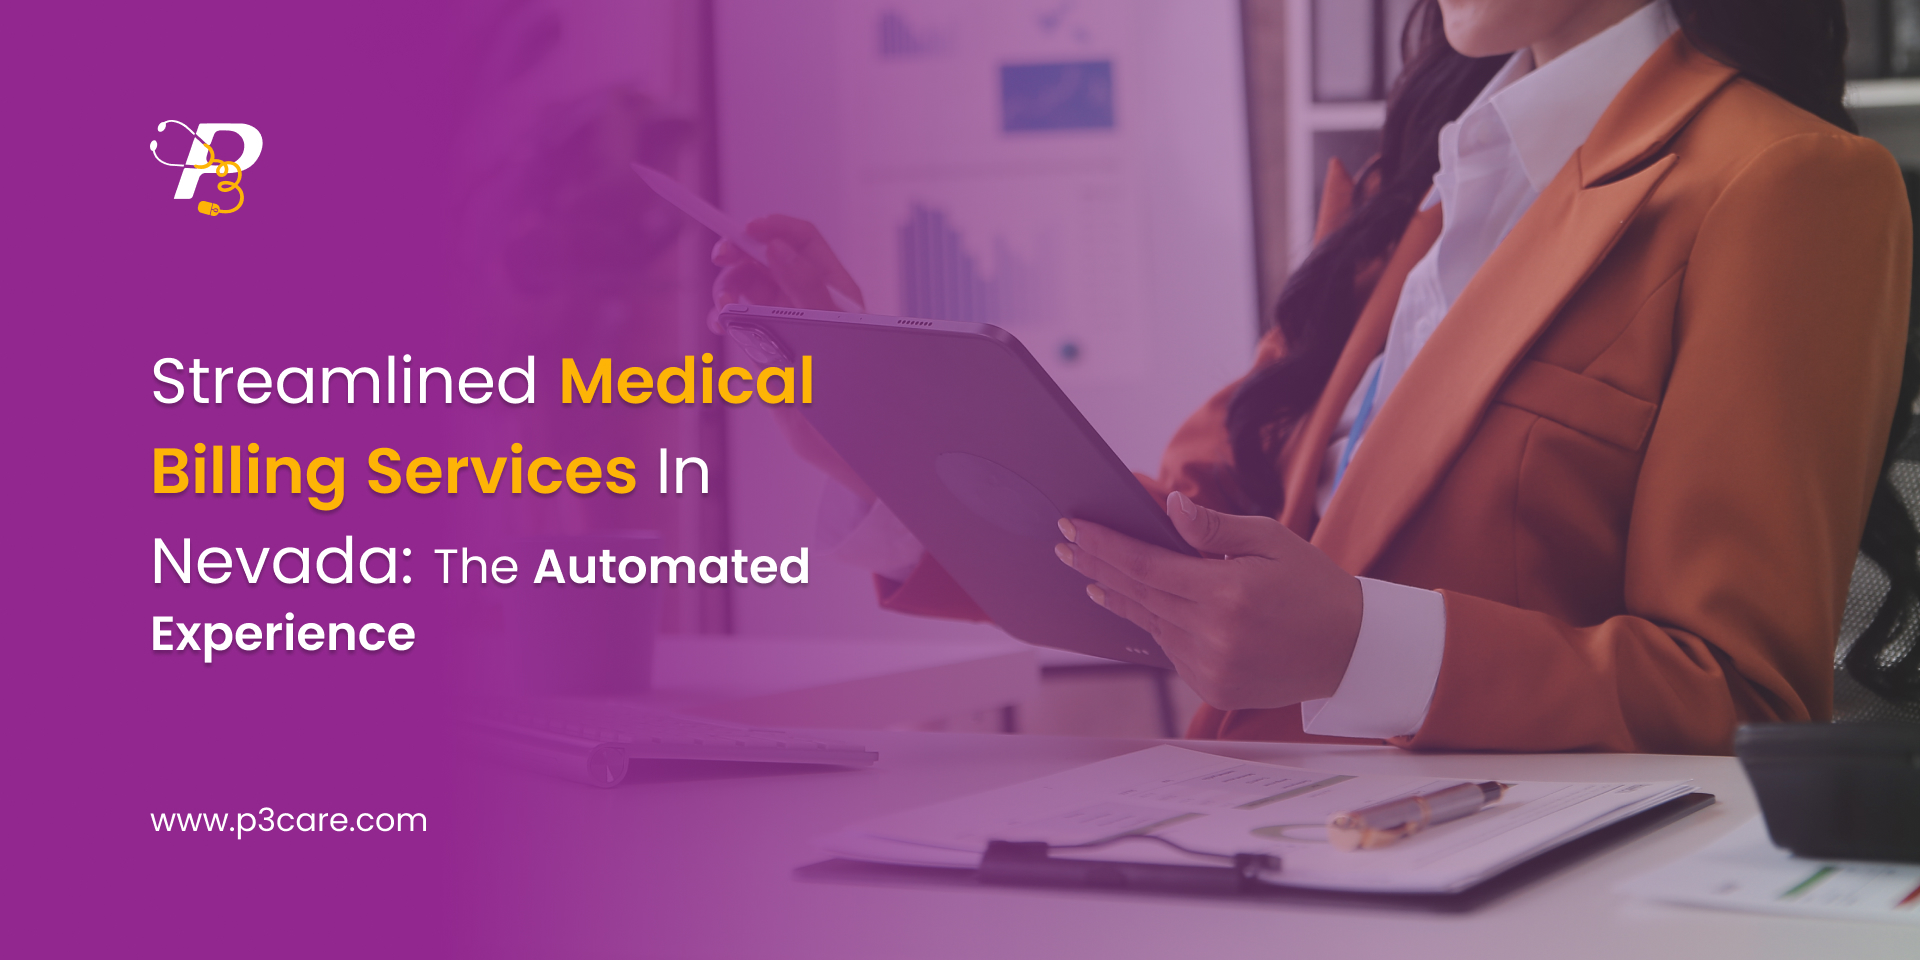 Streamlined Medical Billing Services in Nevada: The Automated Experience